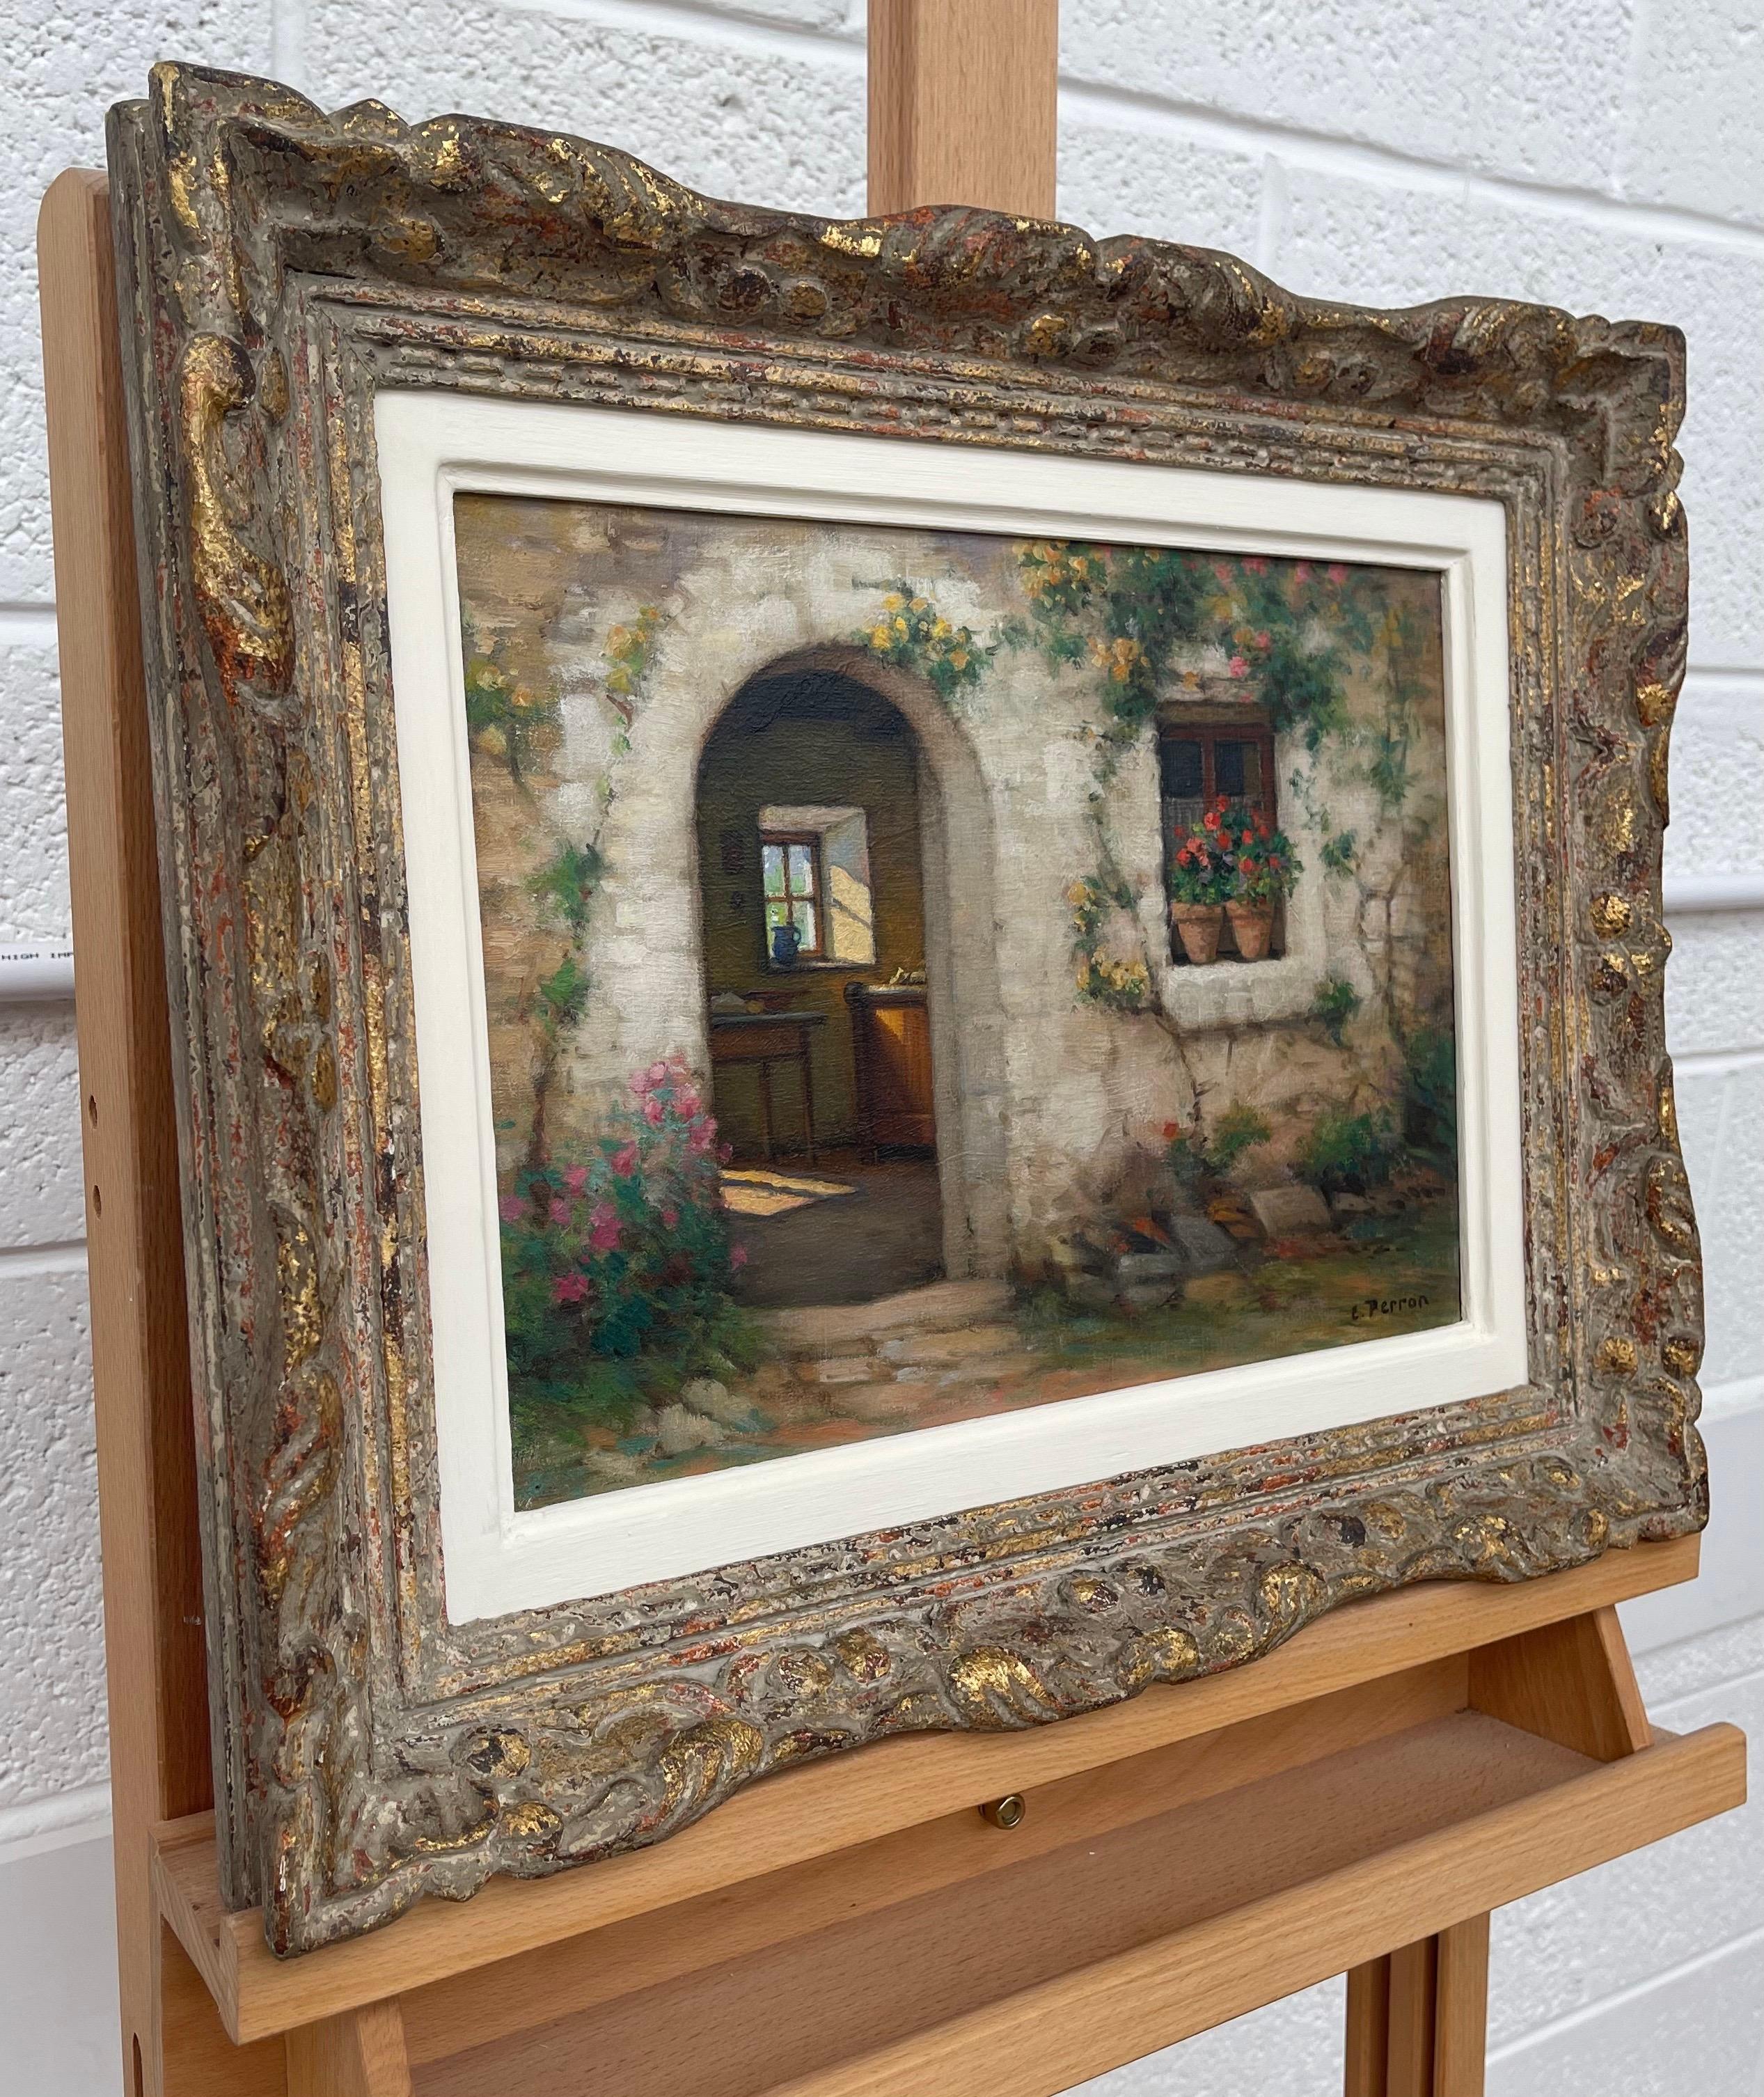 Early 20th Century Oil of French Stone Building entitled 'Interieur et Exteriuer' by the Award-Winning French Artist, Charles Perron (1893 – 1958). 
Presented in a beautiful ornate period gold frame. 

Art measures 12.5 x 9.5 inches
Frame measures